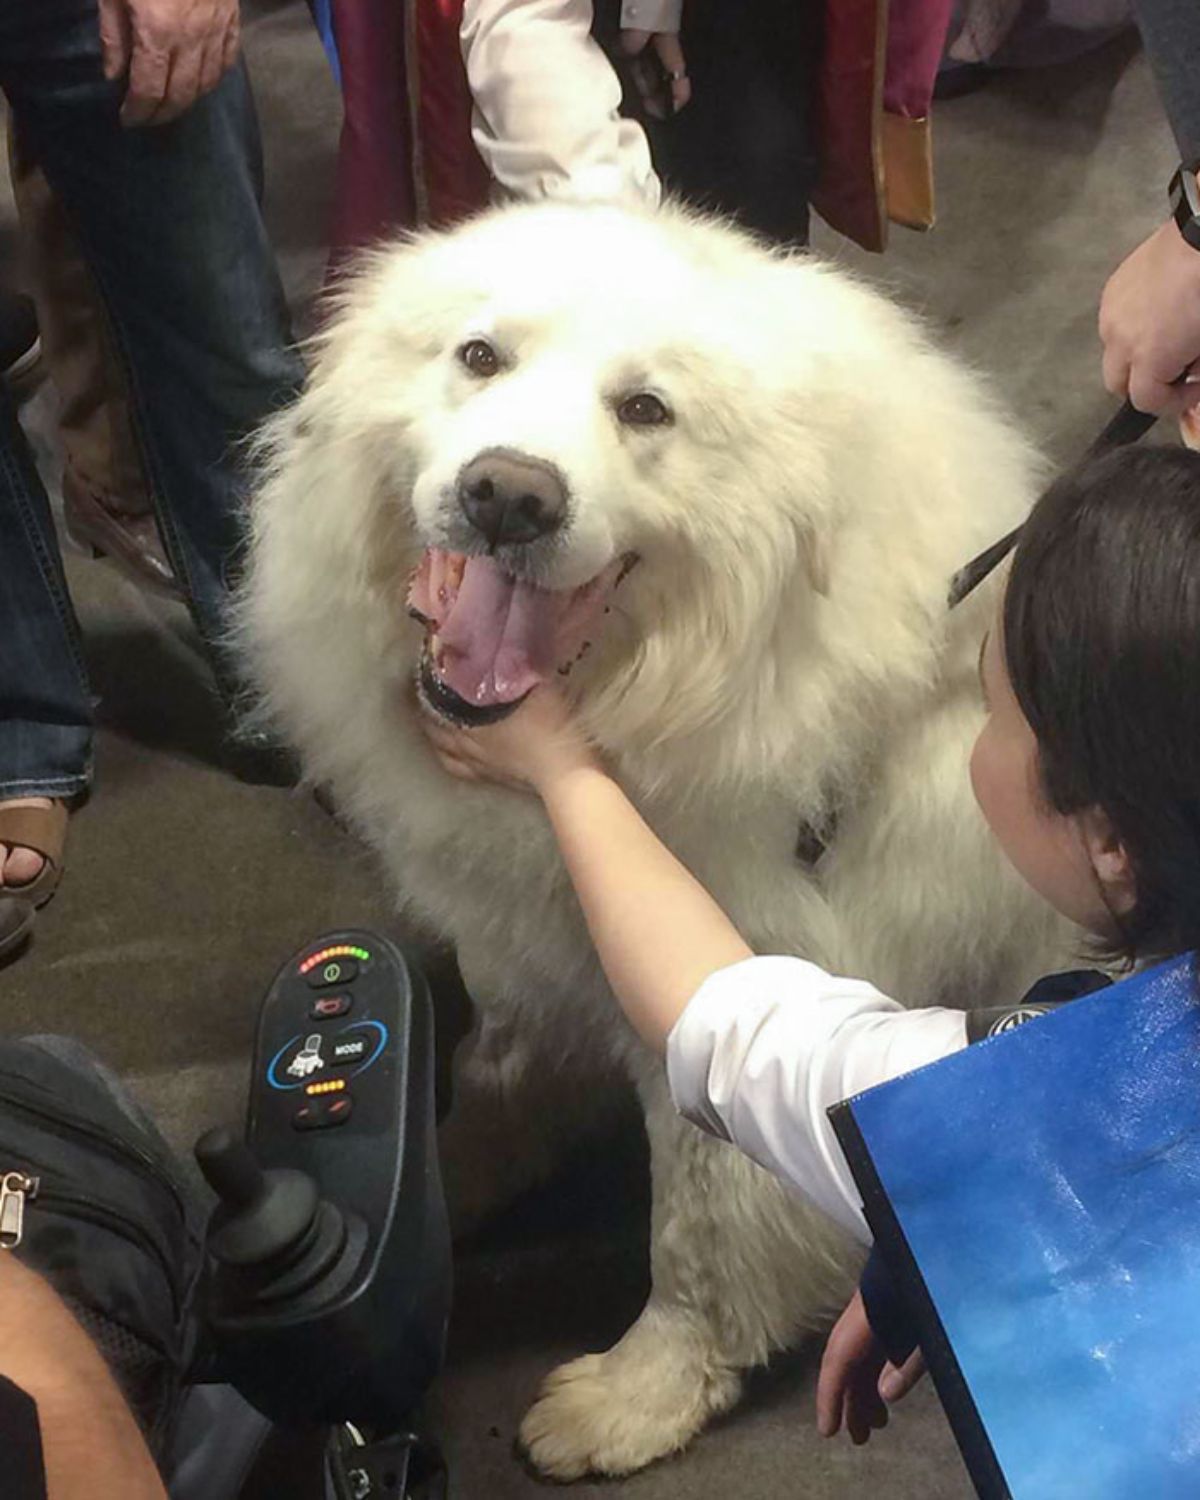 large fluffy white dog getting petted by people